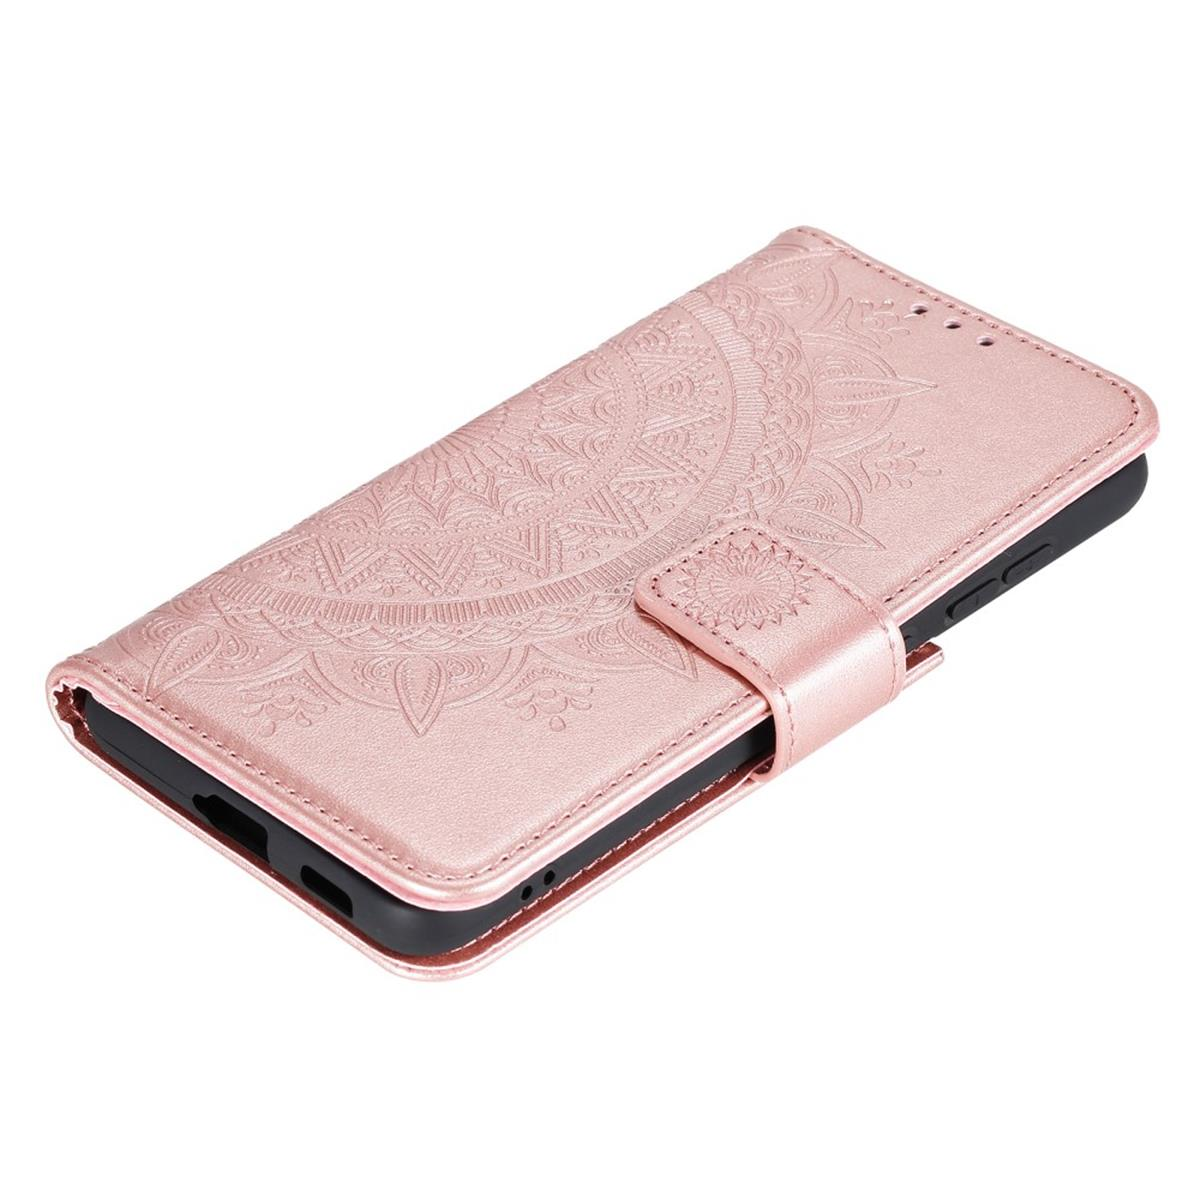 Mandala Muster, Samsung, FE, S21 mit Roségold Galaxy Bookcover, COVERKINGZ Klapphülle